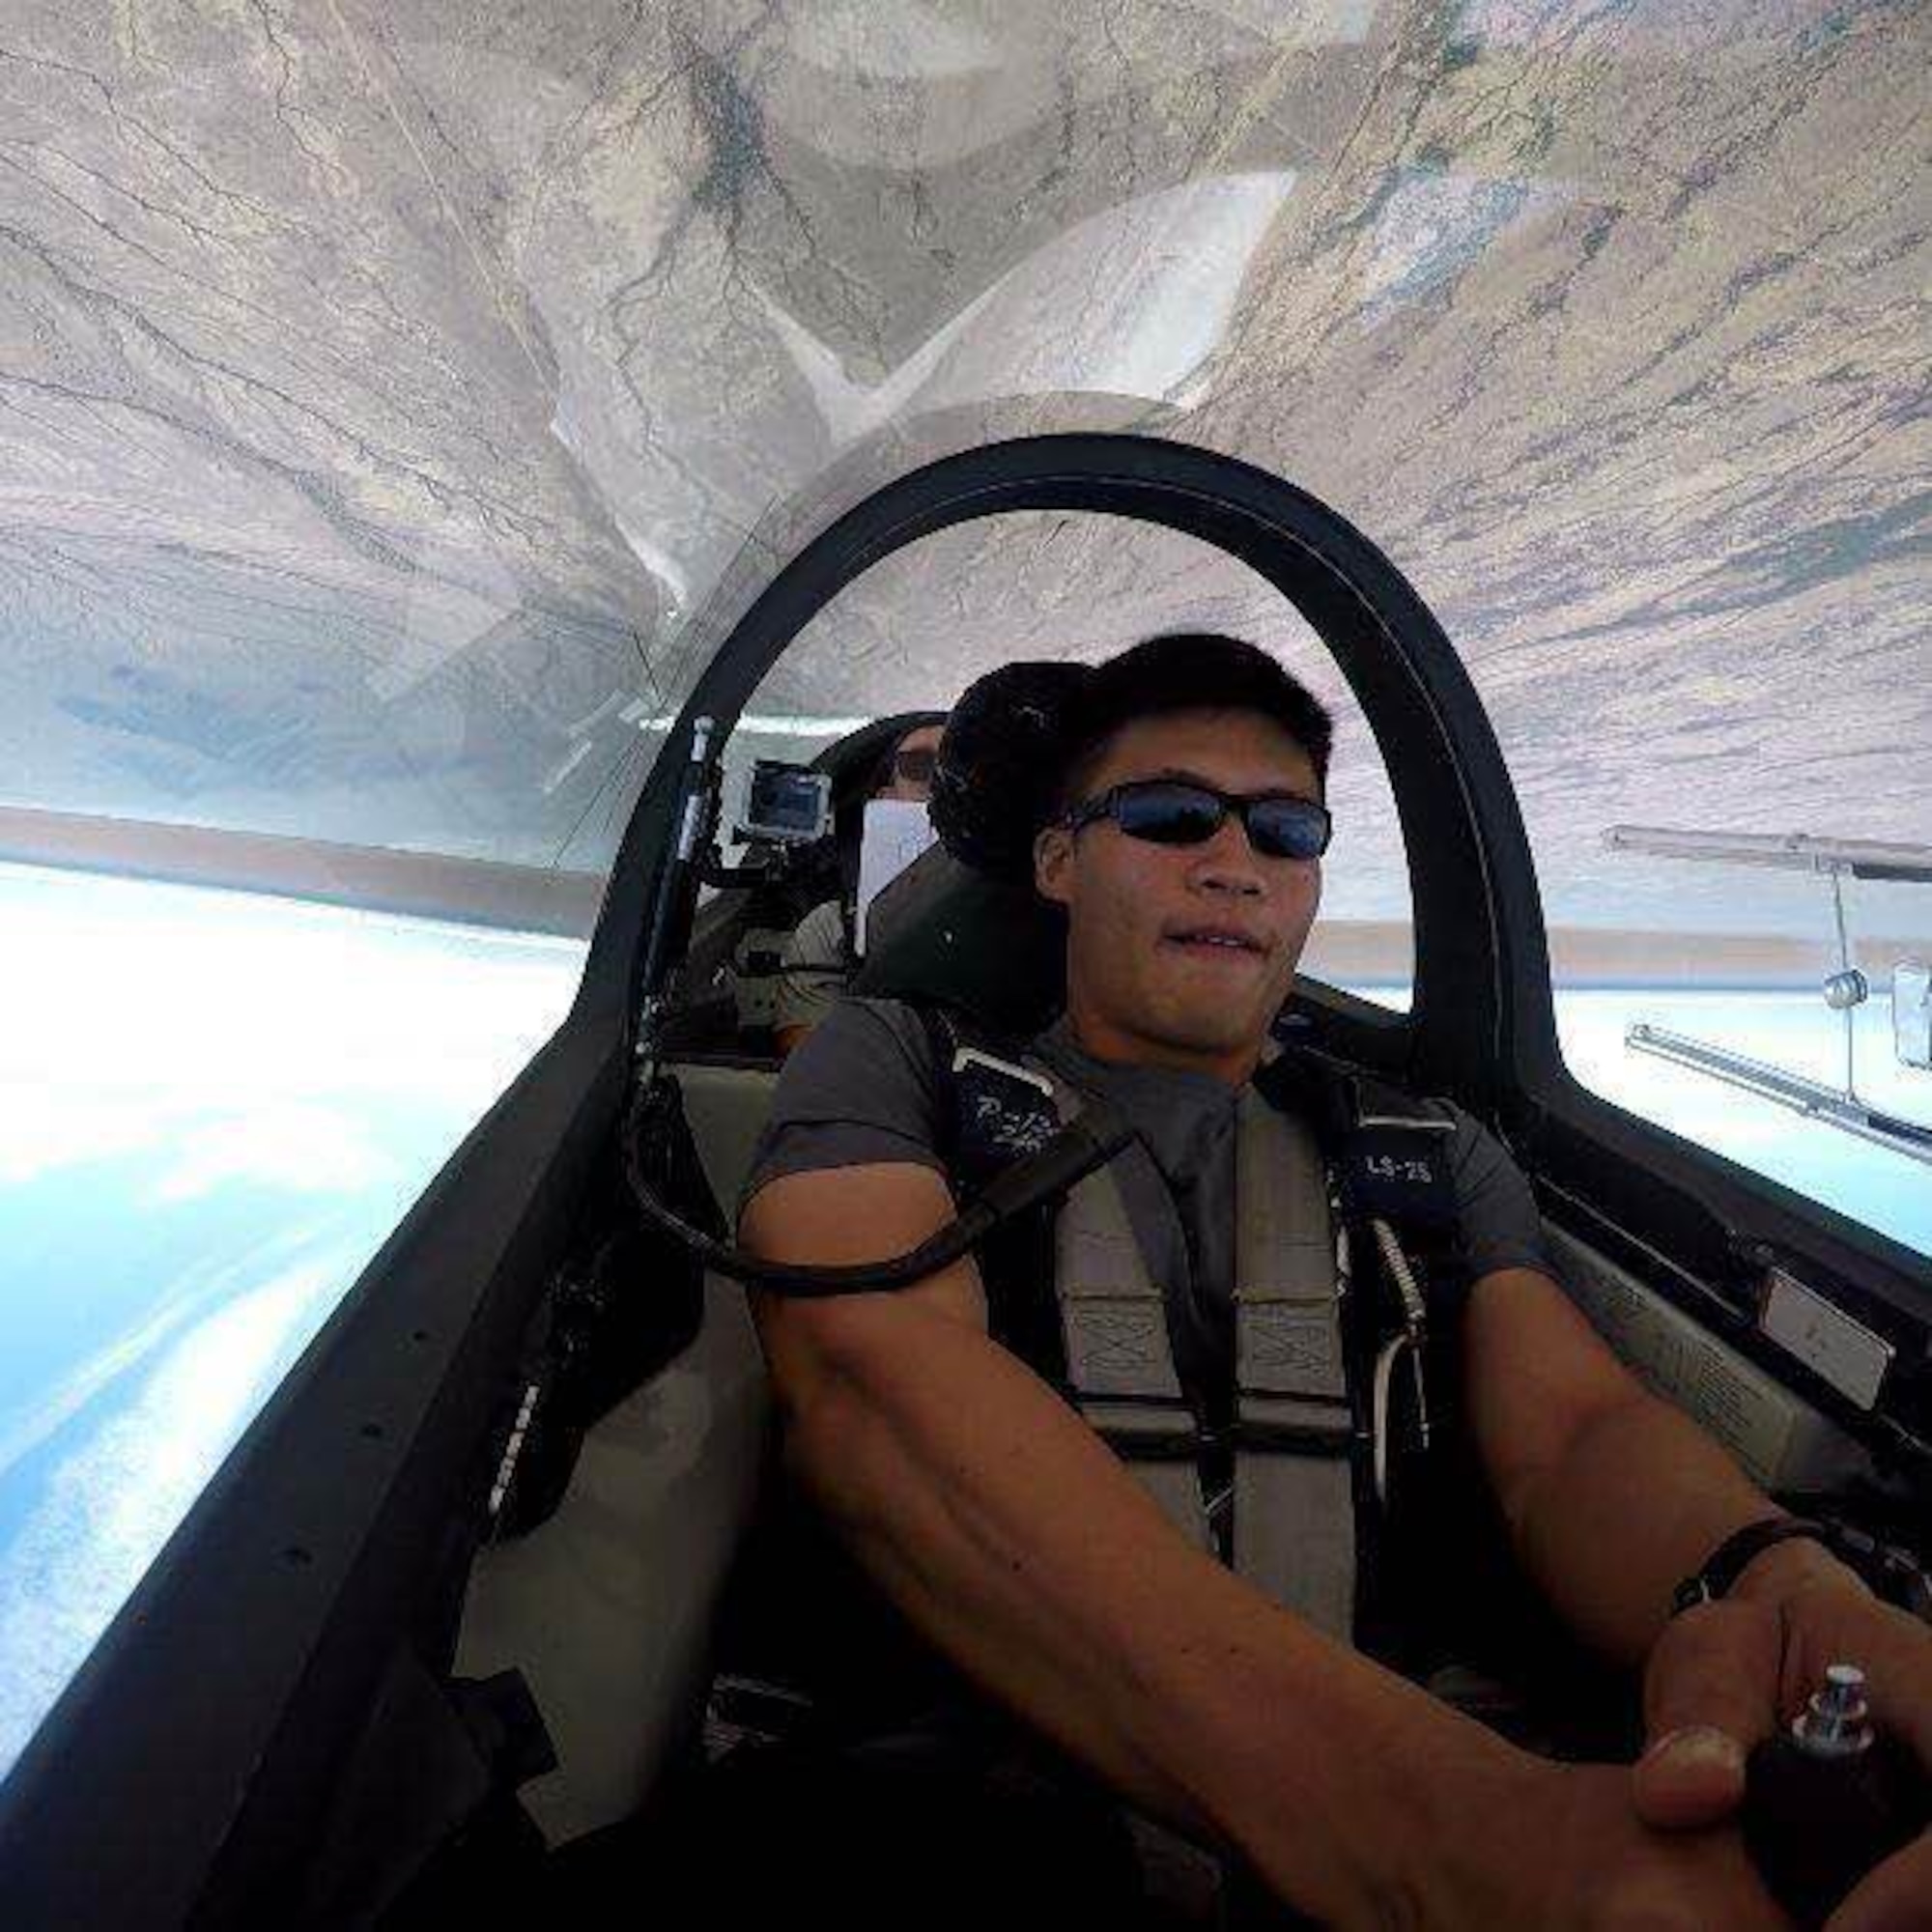 Cadet 2nd Class Khornwitpong Soonthonnitikul, an international student from Thailand at the U.S. Air Force Academy, flies upside down in a TG-16A glider during aerobatics training over Coolidge, Arizona. (Courtesy photo)